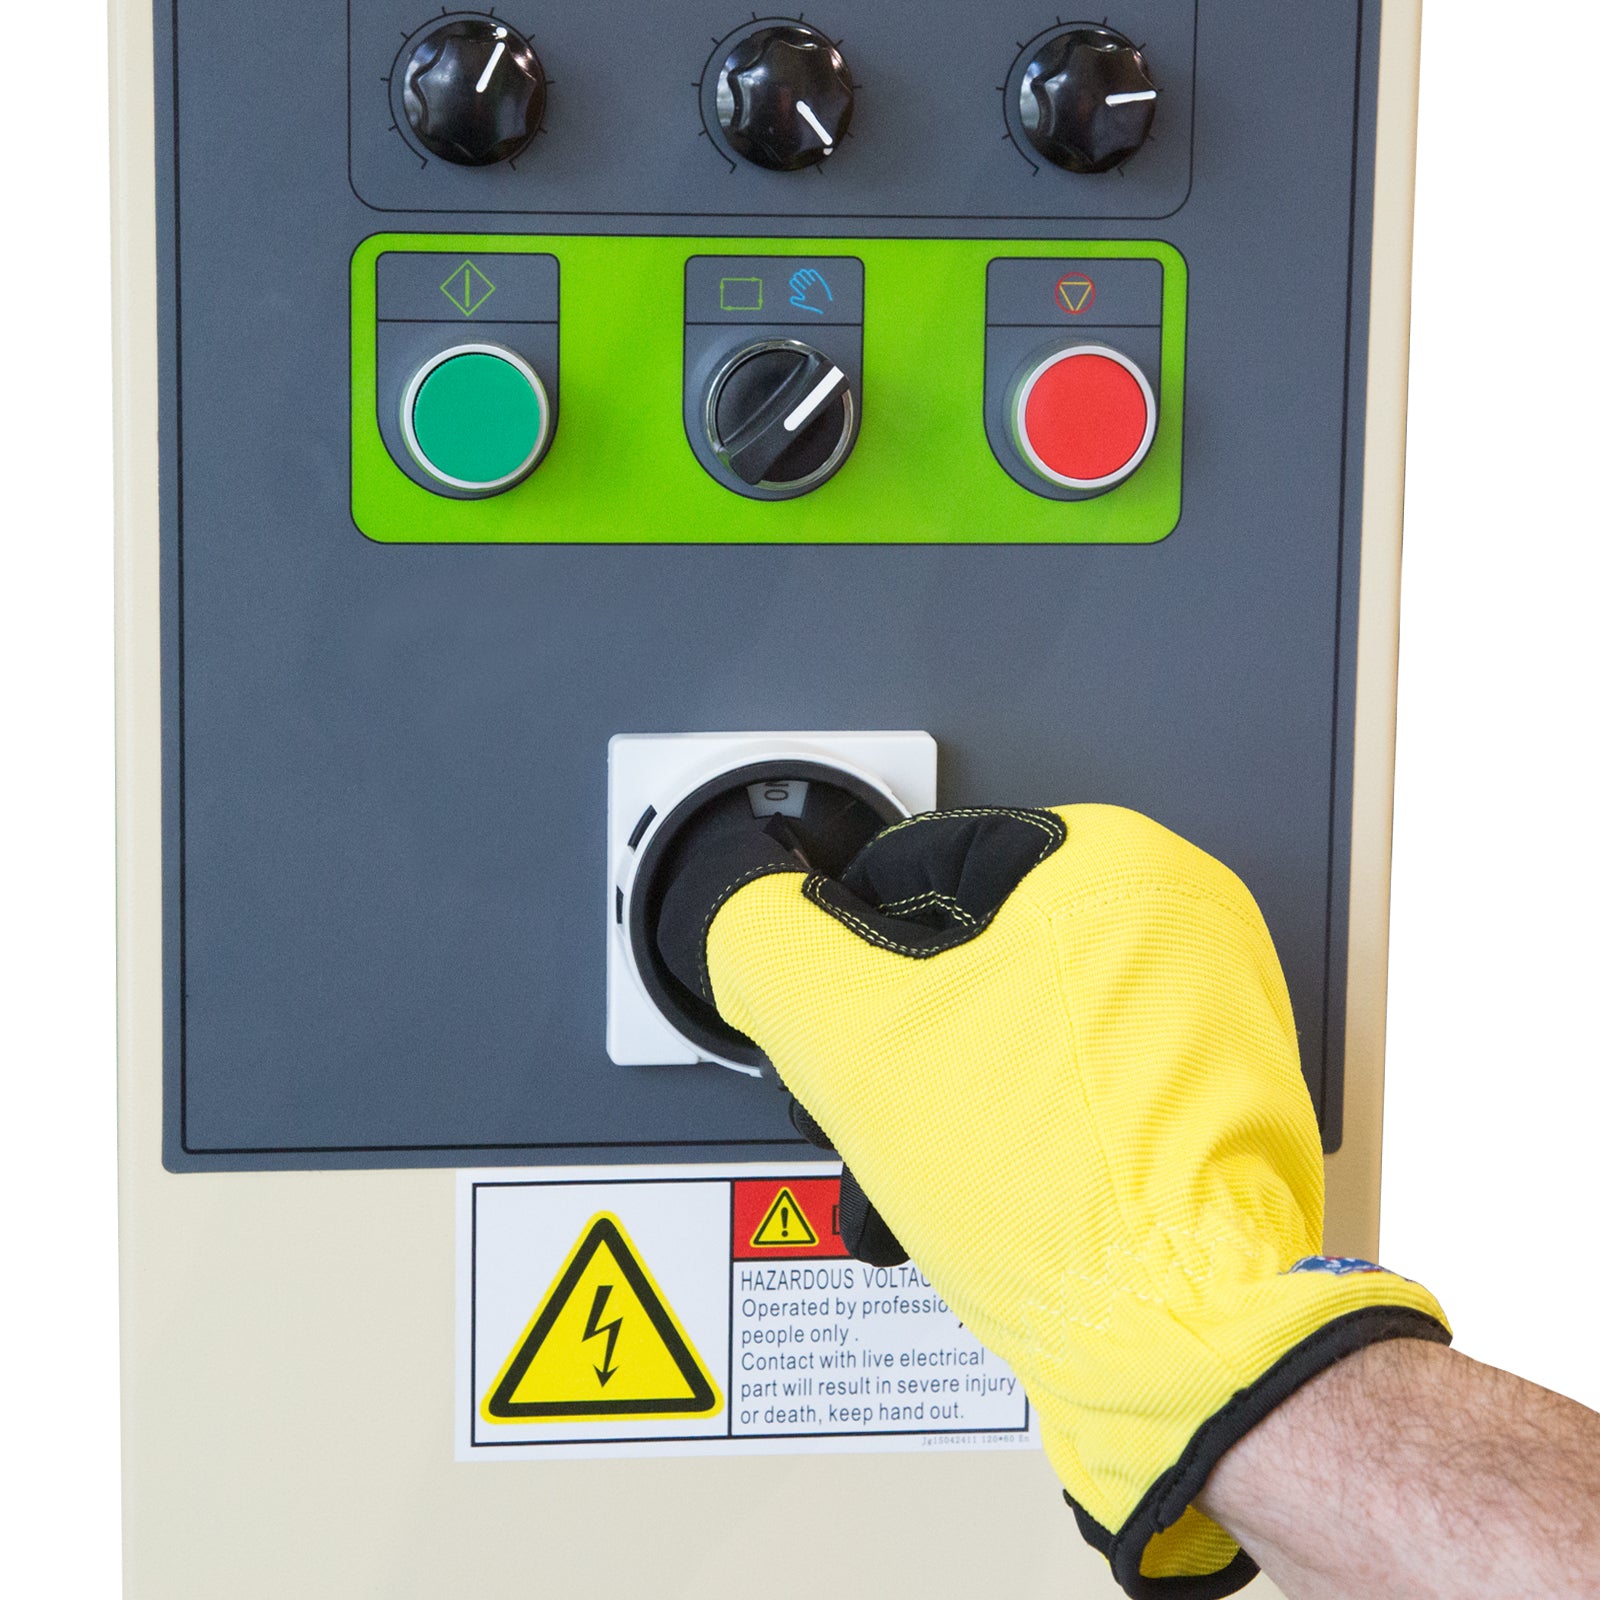 Close-up detail shot of the control panel of a stretch wrapper for pallets. A hand wearing a yellow safety work glove is adjusting one of the control knobs. 